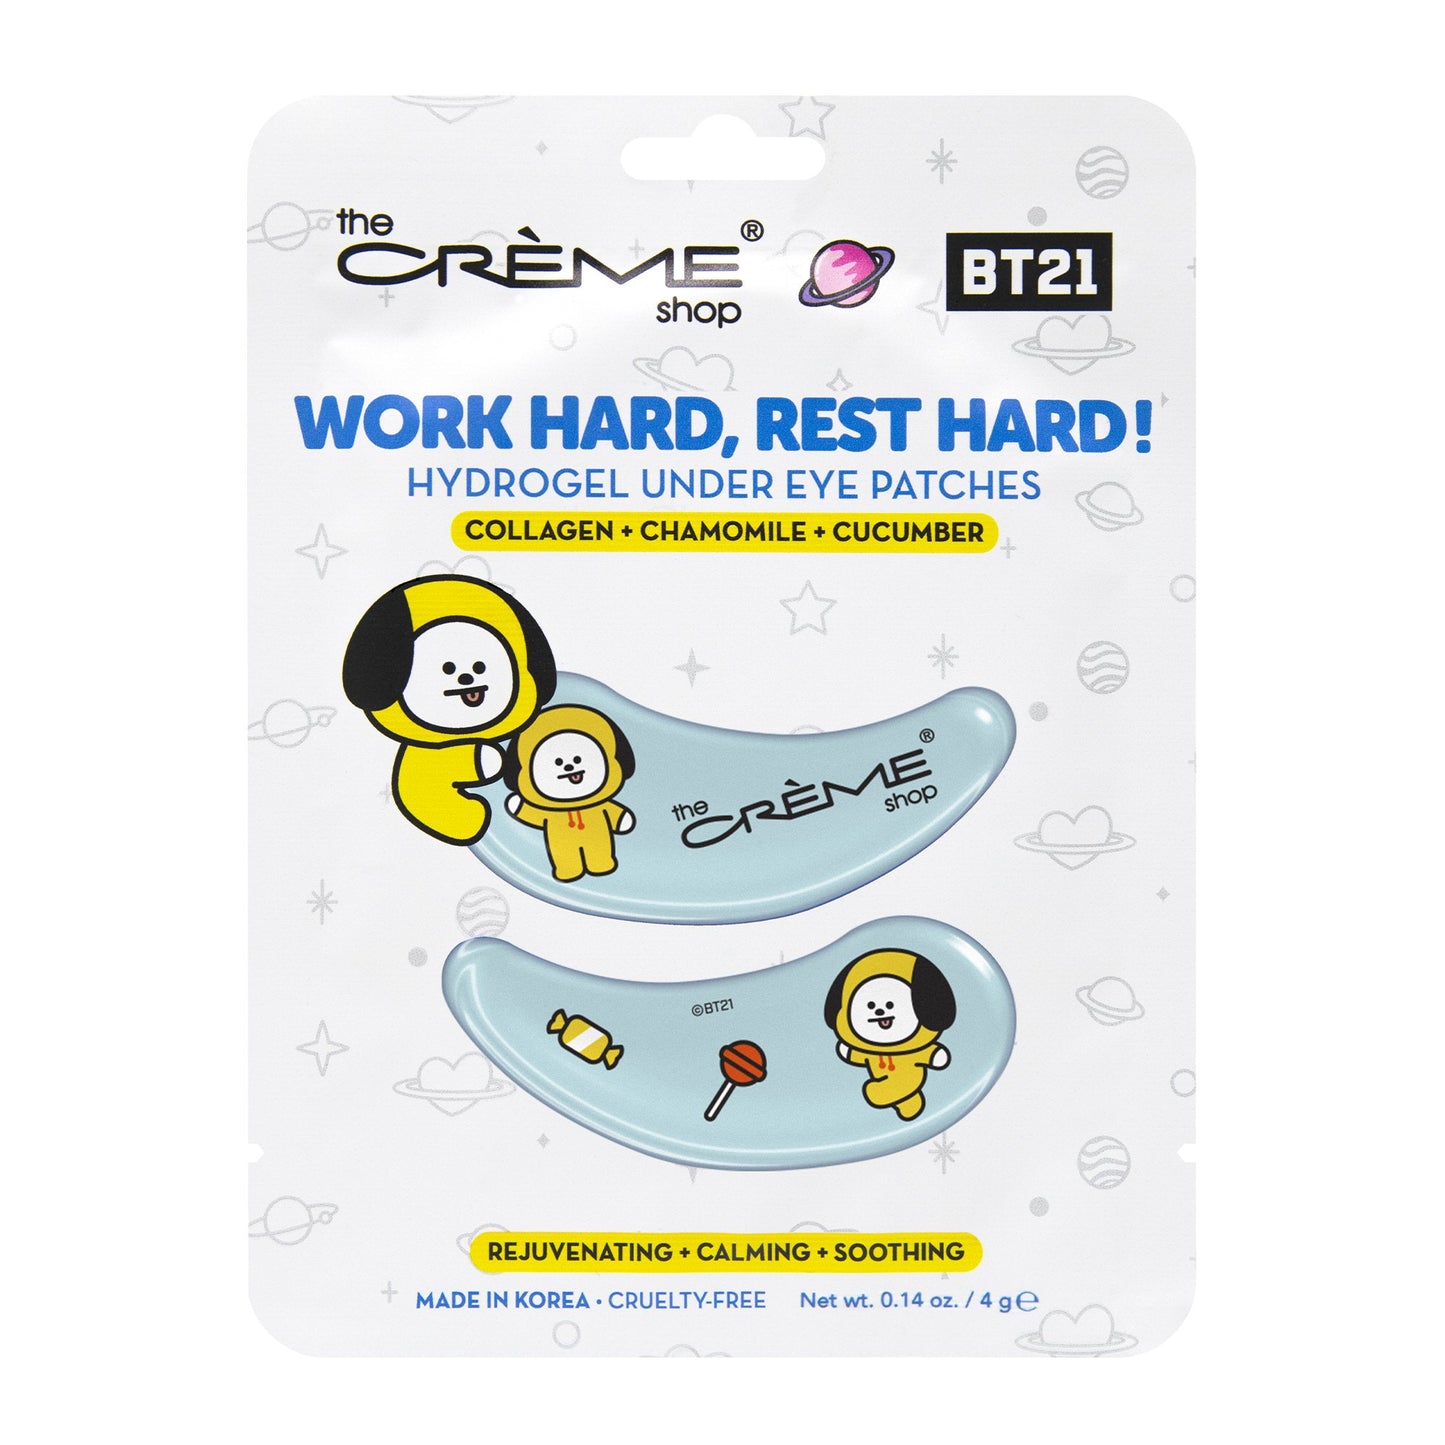 “Work Hard, Rest Hard!” CHIMMY Hydrogel Under Eye Patches | Rejuvenating, Calming, & Soothing Under Eye Patches The Crème Shop x BT21 